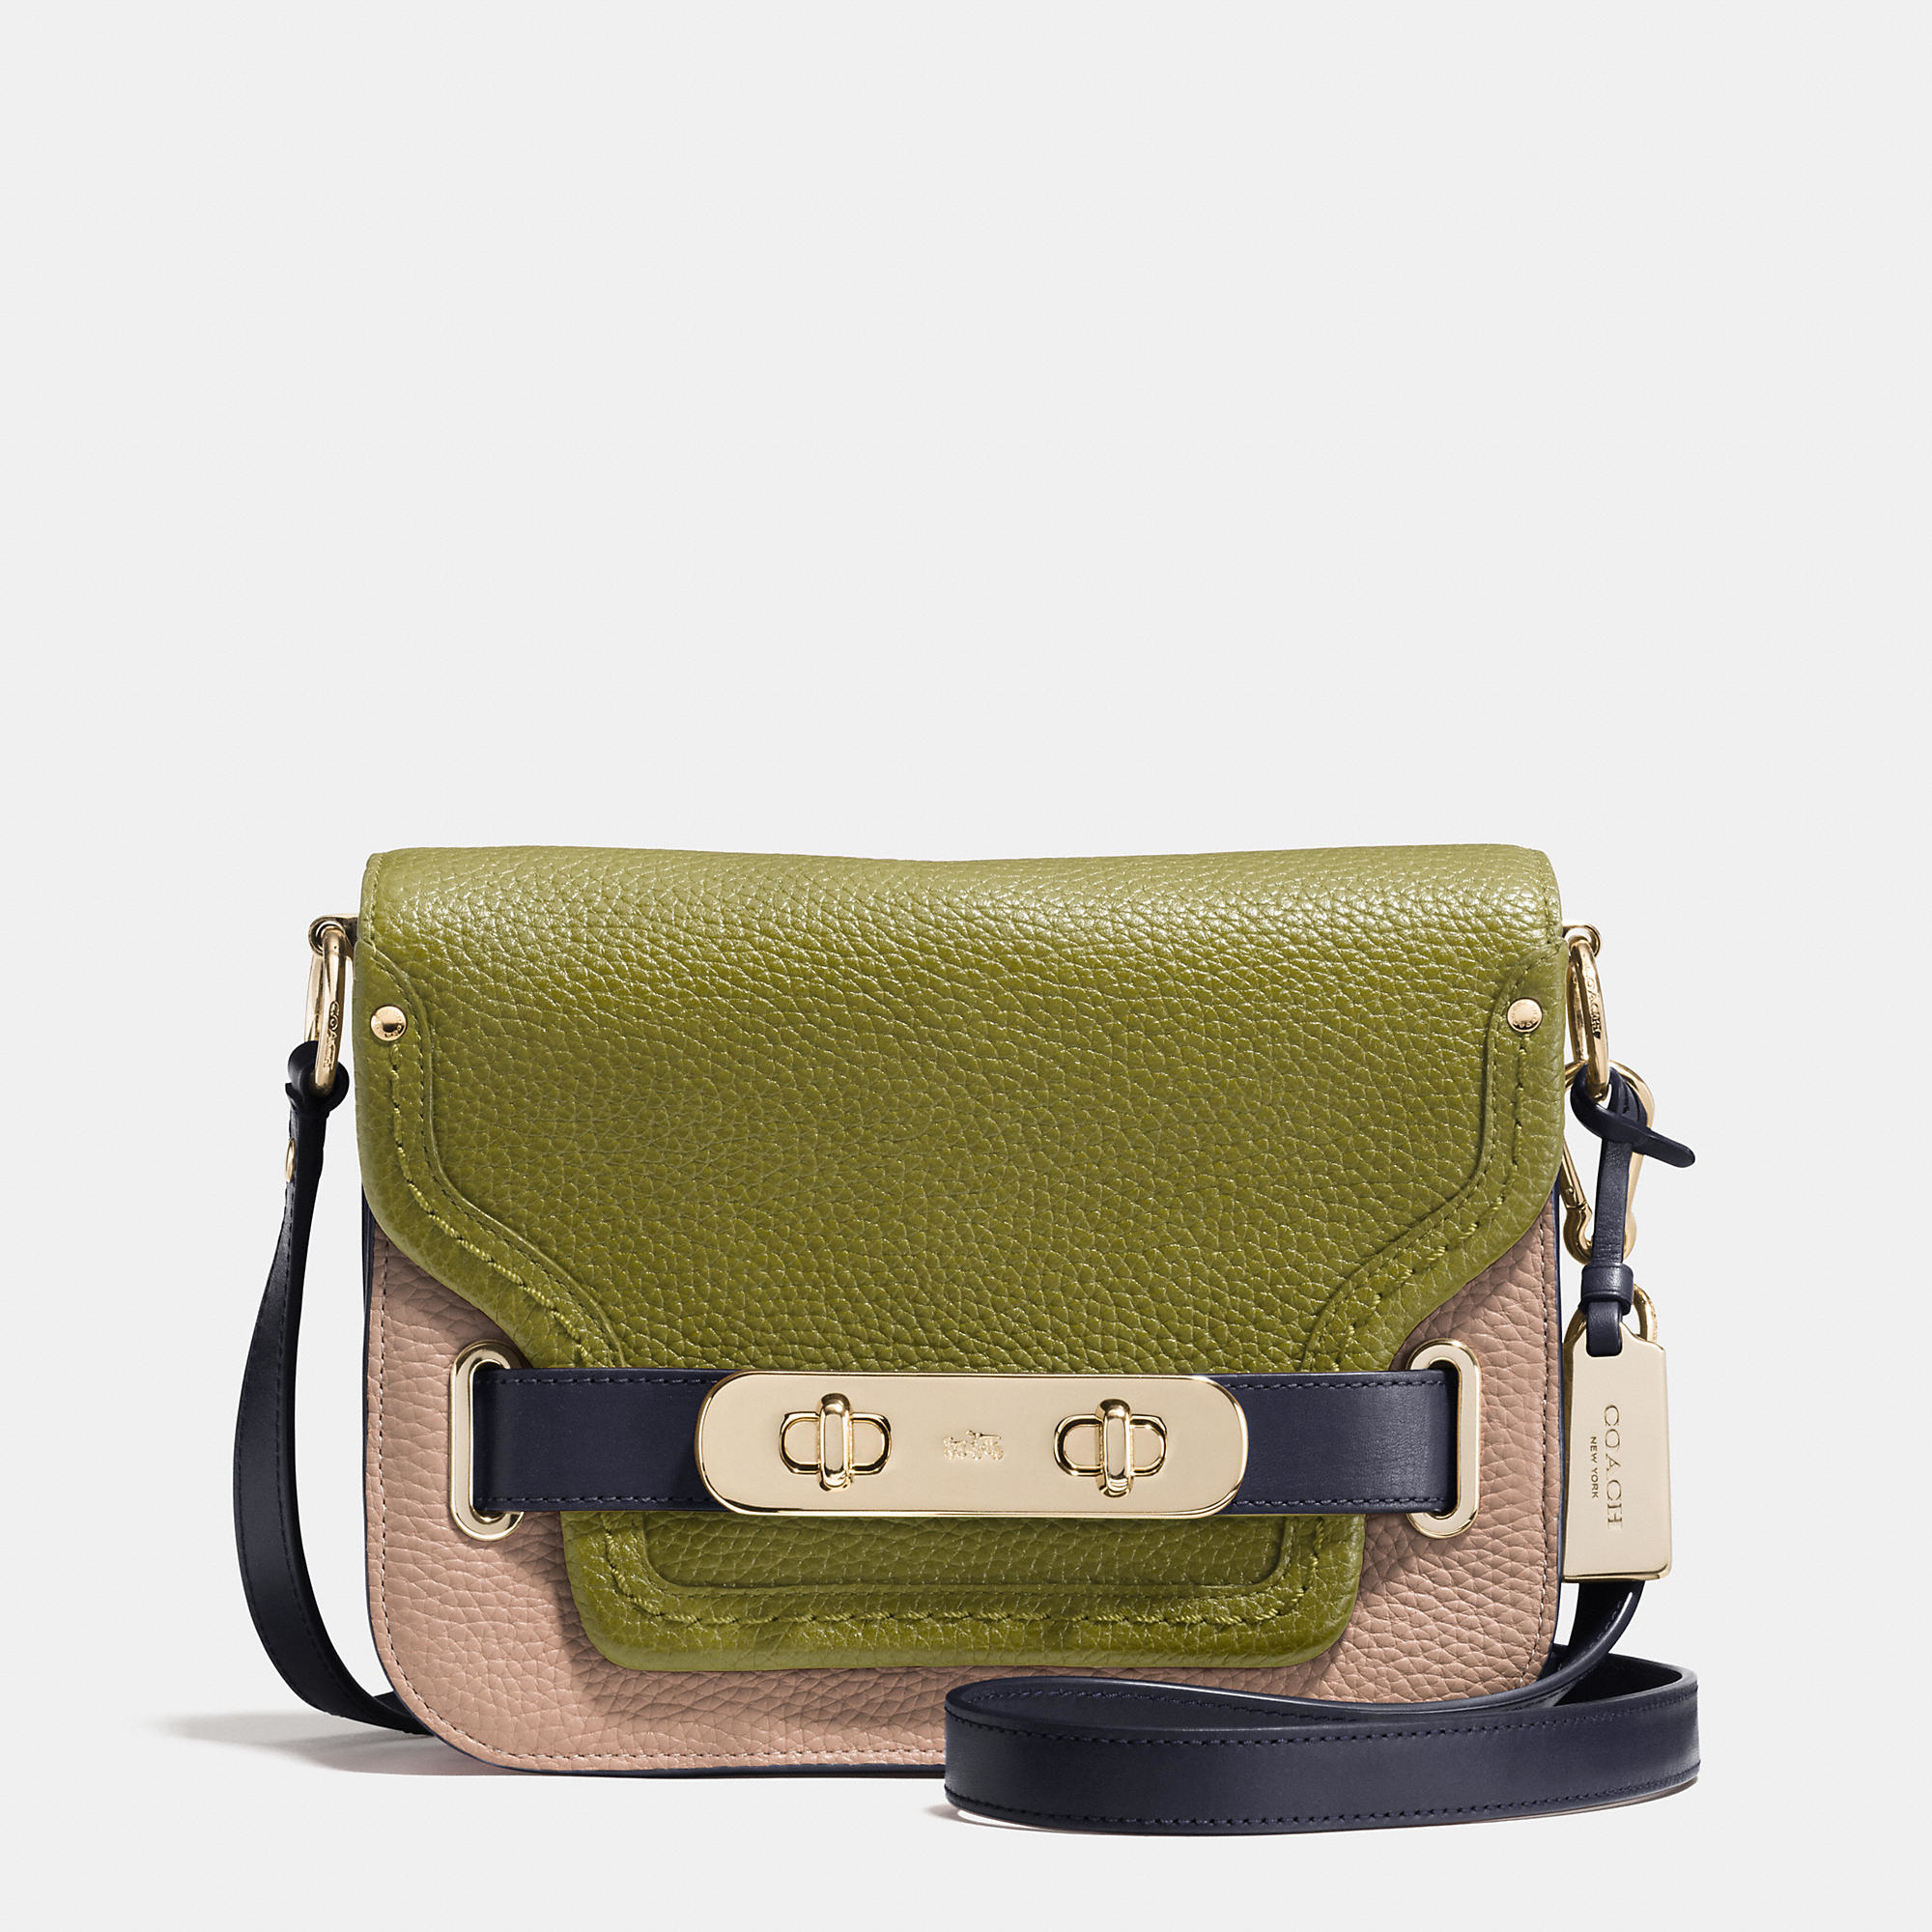 Lyst - Coach Swagger Small Shoulder Bag In Colorblock Pebble Leather in Green